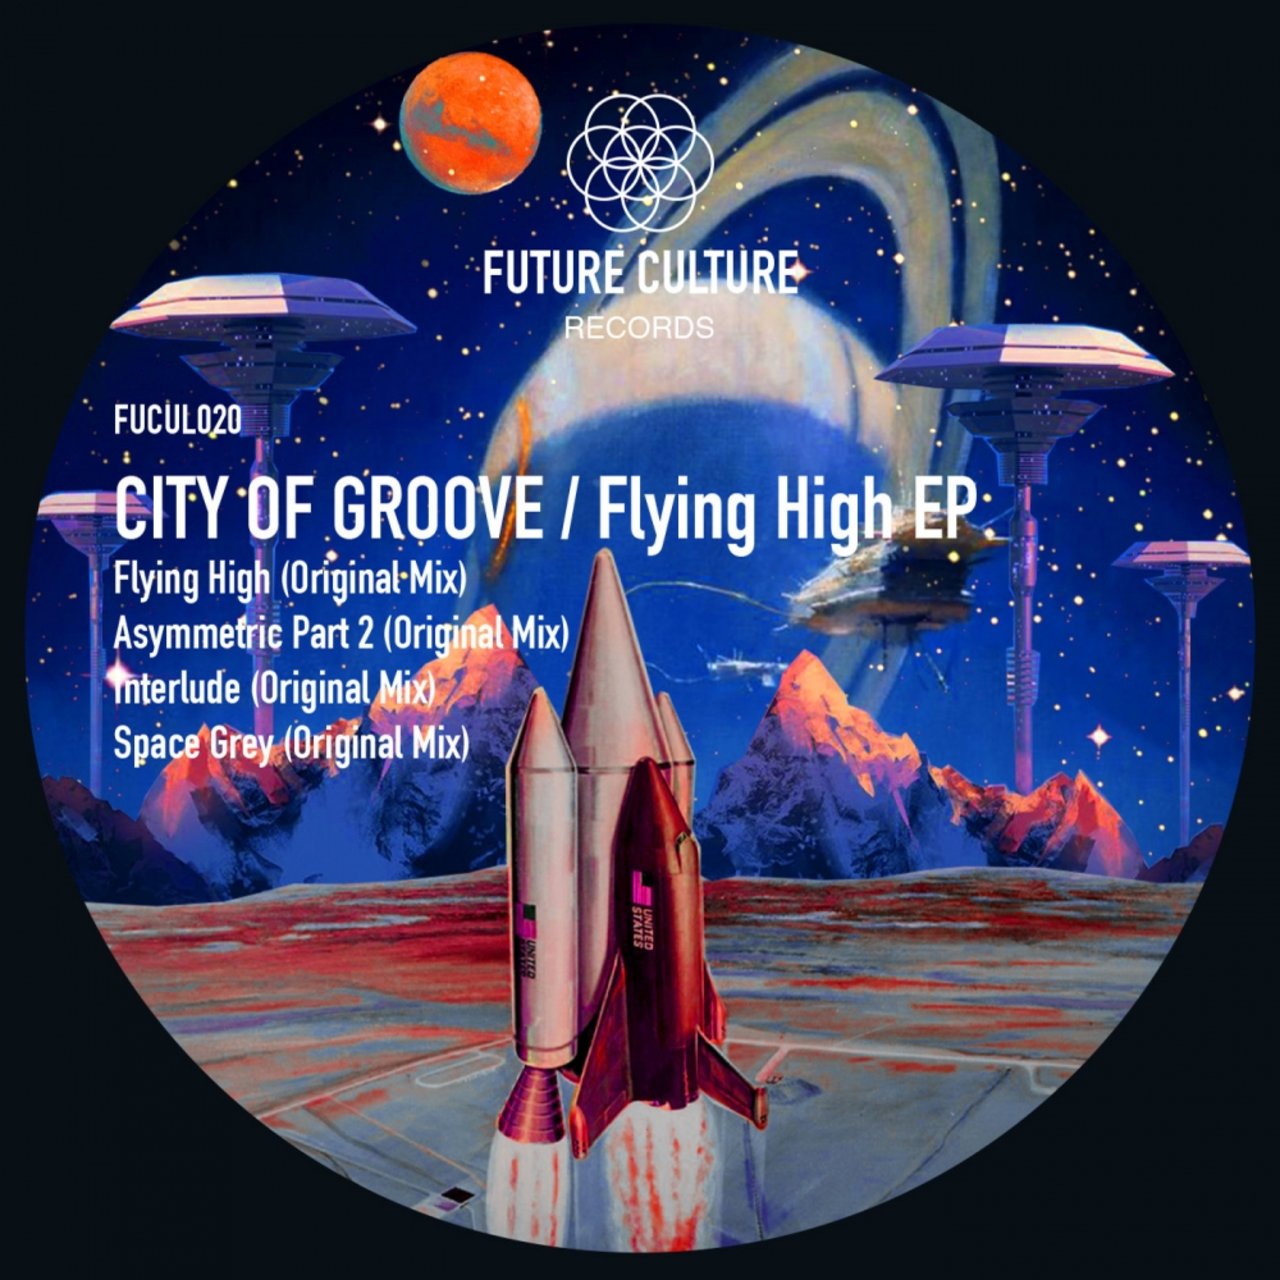 City Of Groove - Flying High EP / Future Culture Records